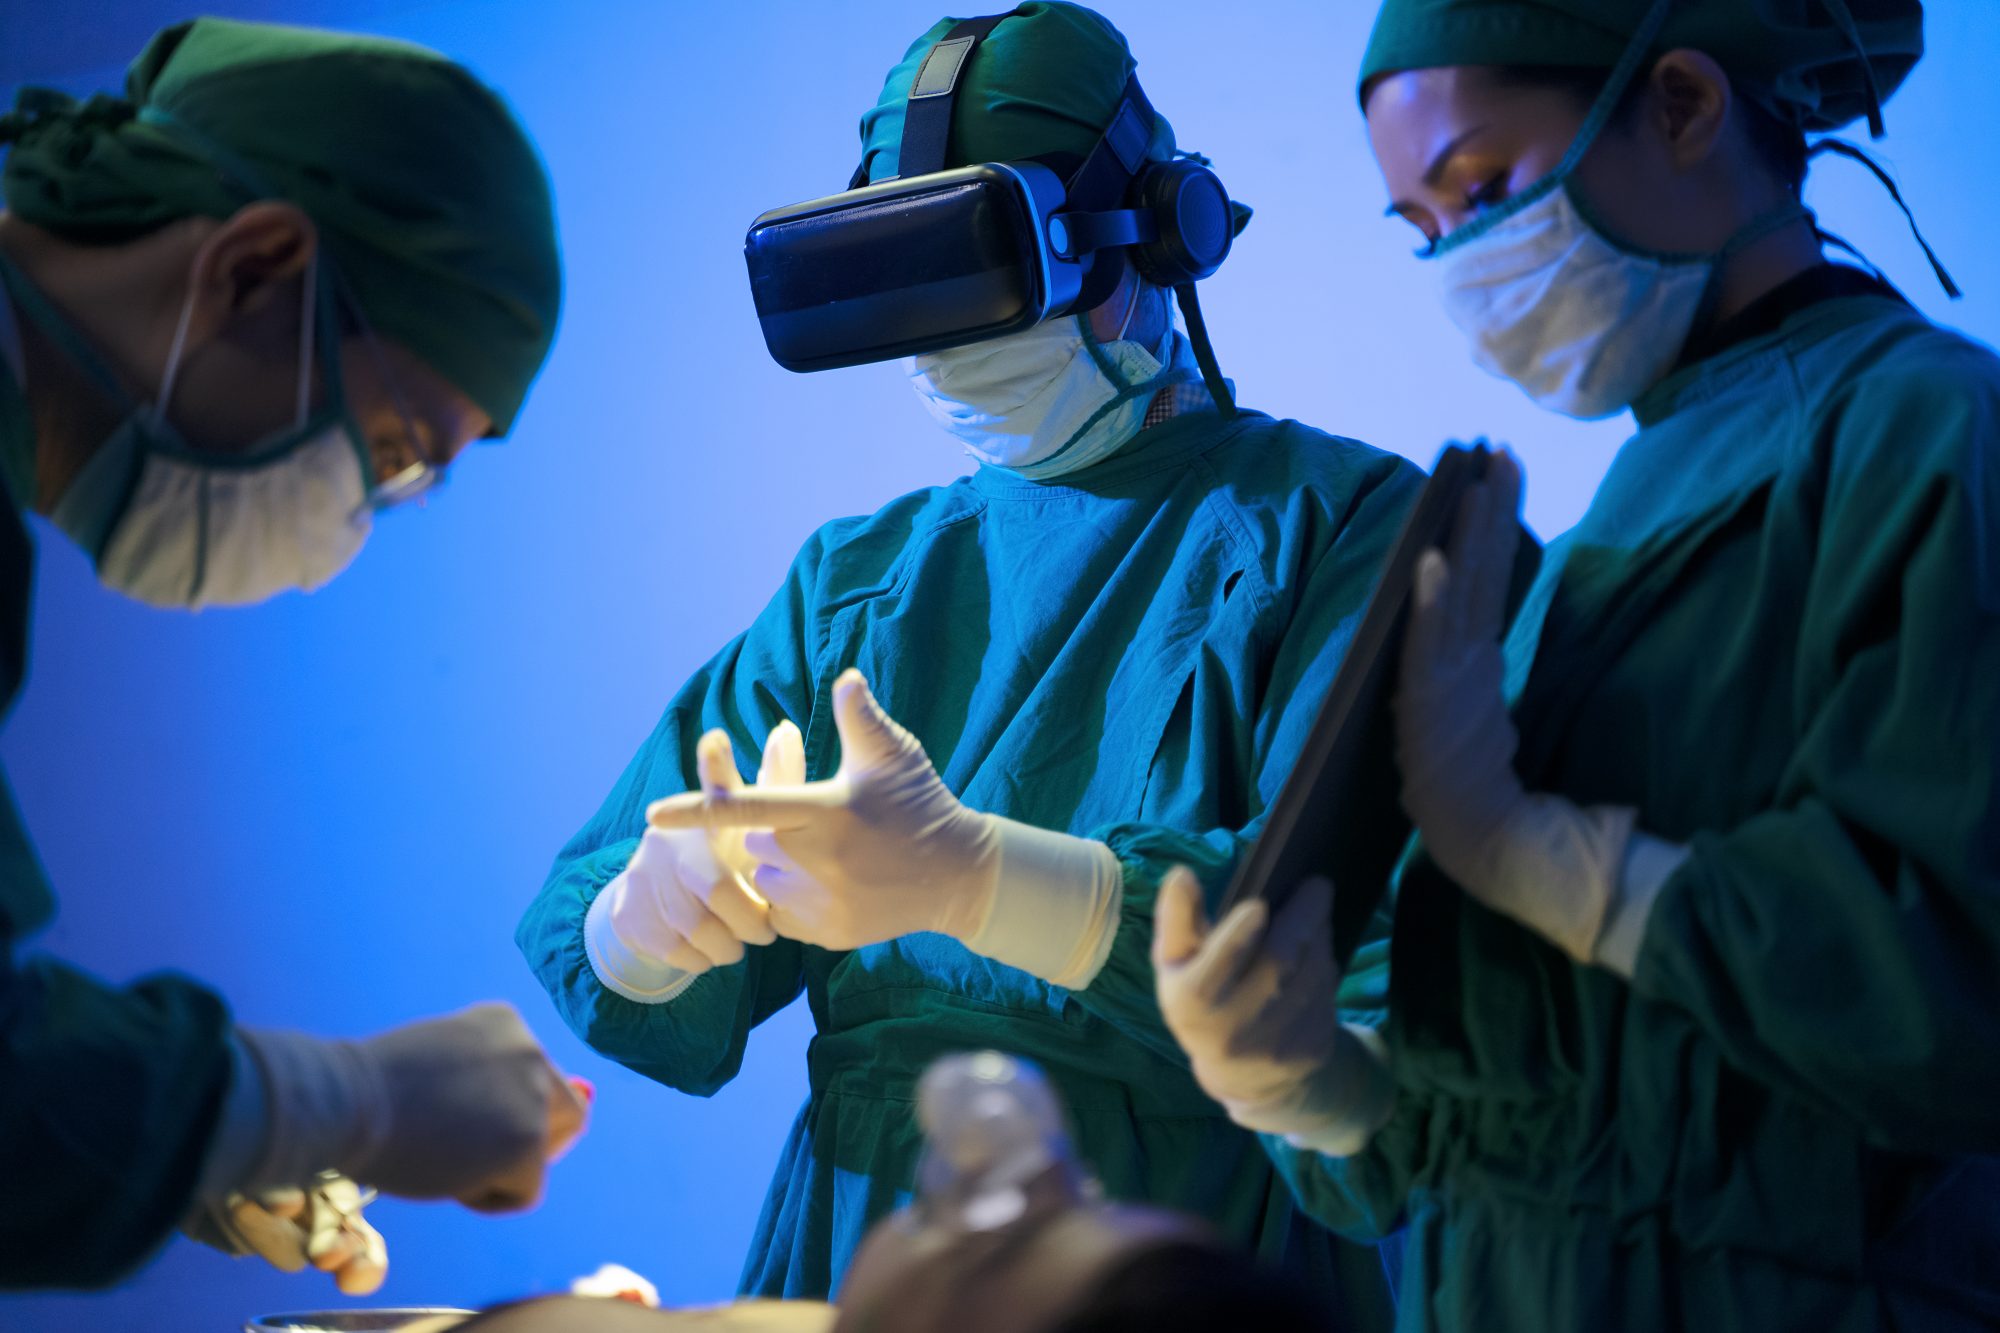 Doctors are surgery to patient at operating room. Using virtual reality glasses. Medical and health care concept.